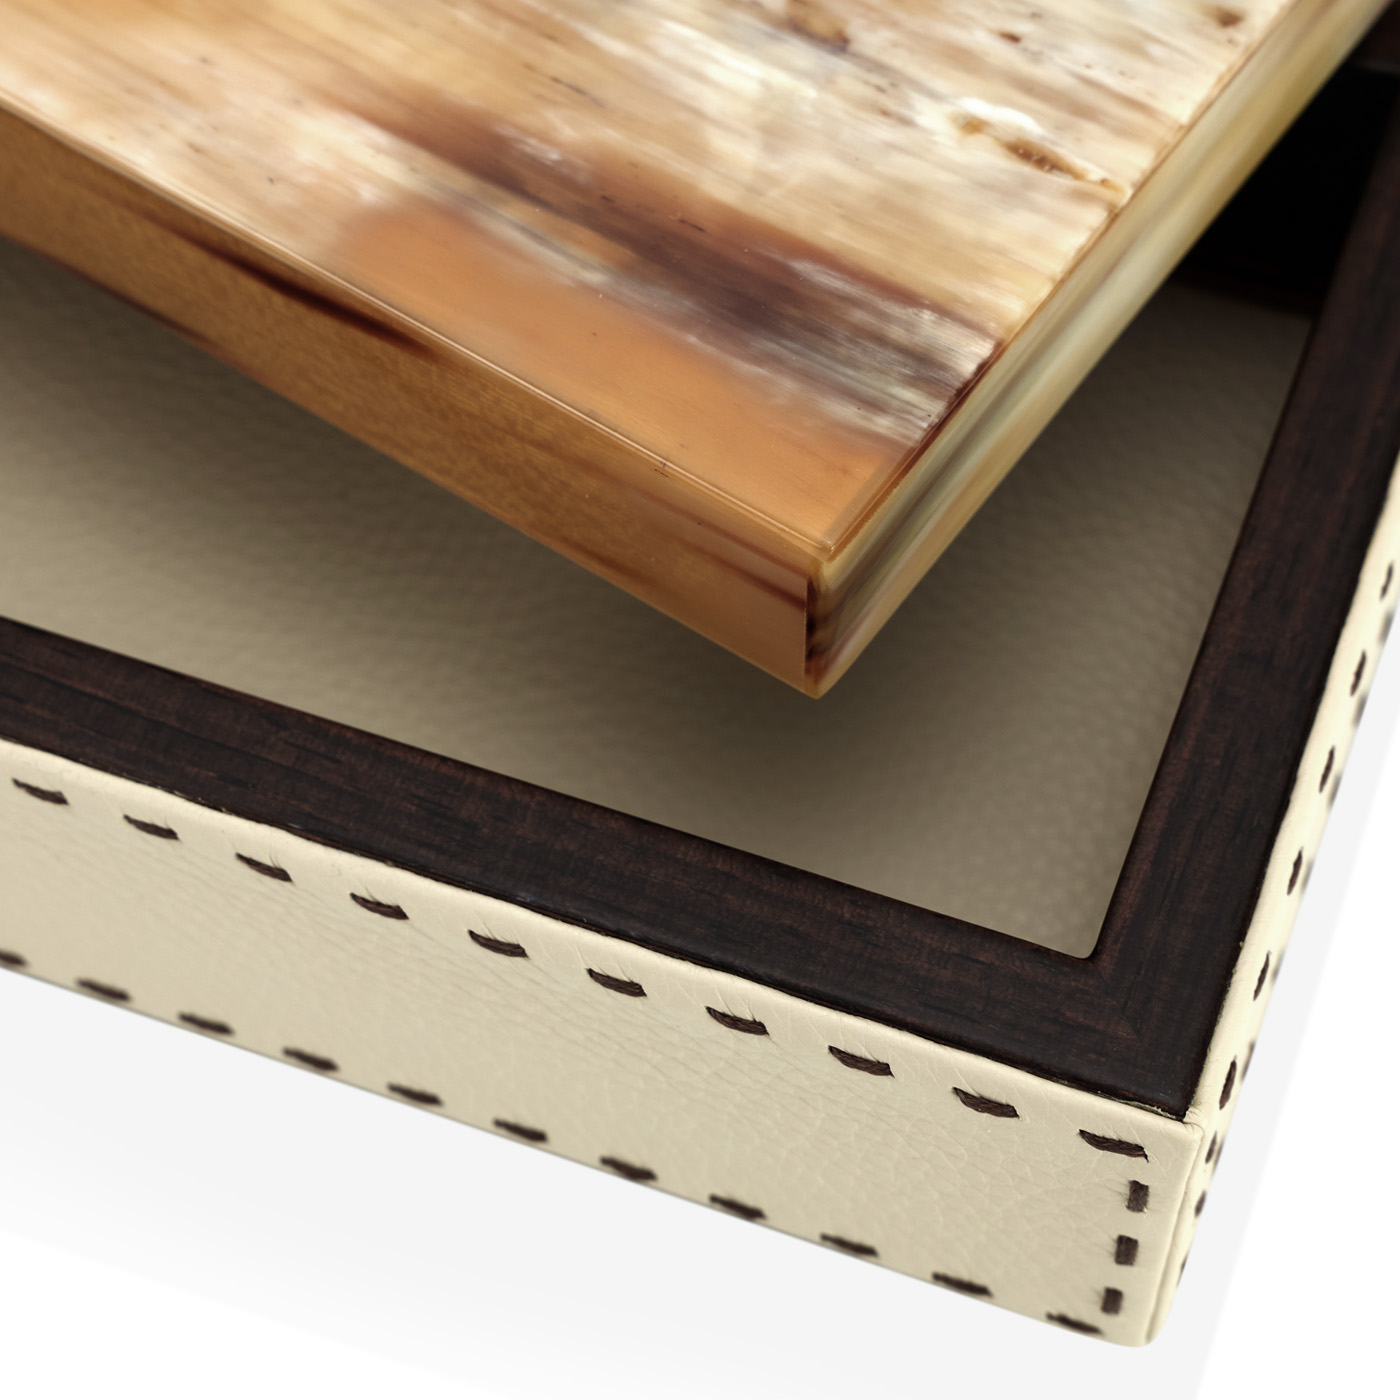 Picture frames and boxes - Ottavia box in horn and Ice-cream colour leather mod. 4468 - detail - Arcahorn